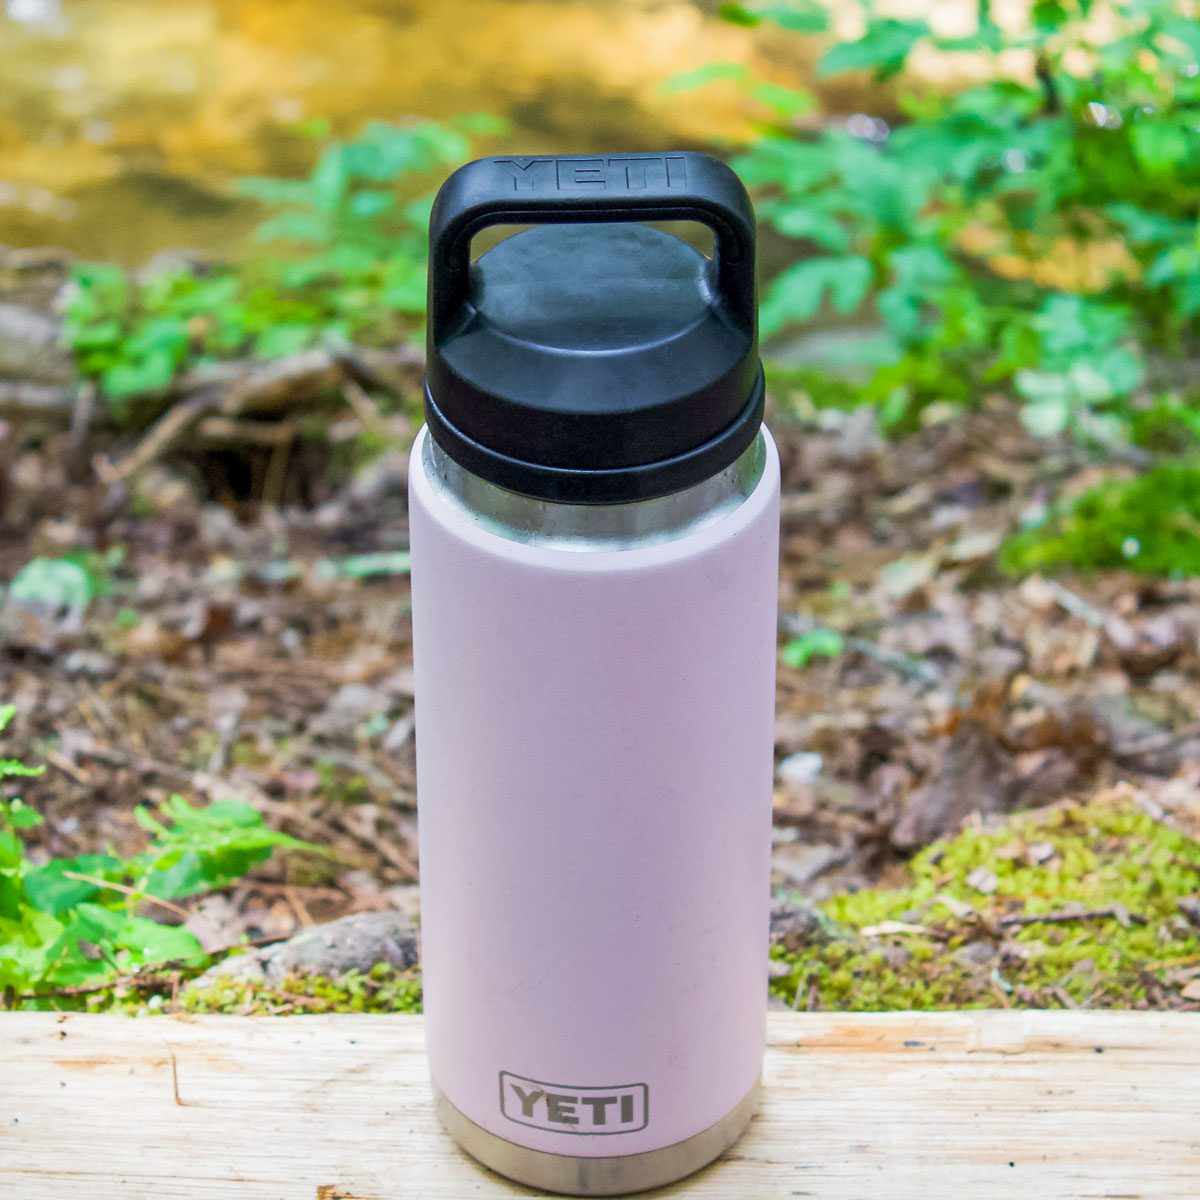 <h3>Yeti Rambler Bottle</h3> <p>Our top pick for the best water bottle is <a href="https://www.yeti.com/drinkware/bottles/21071501698.html" rel="noopener">Yeti's Rambler bottle</a>. First, it comes in five sizes for gym rats and savvy sippers: 18-ounce, 26-ounce, 36-ounce, 46-ounce and 64-ounce. <span>Because it’s a </span><a href="https://www.familyhandyman.com/list/best-yeti-products/"><span>Yeti product</span></a><span>, it’s durable enough to survive drops. </span><span>Beat the scorching heat with double wall insulation and keep beverages cold</span><span> for days. </span></p> <p><span>“The supersized, 64-ounce Rambler is what I like to call my 'emotional support water bottle,’” says Senior Shopping Editor <a href="https://www.familyhandyman.com/author/caroline-lubinsky/">Caroline Lubinsky</a>. “The double-wall vacuum insulation keeps drinks cold and ice intact for hours, even on hot days.”</span></p> <p><span>“The 26-ounce is my everyday water bottle, and I have the 36-ounce and 46-ounce sizes," says Senior Shopping Editor <a href="https://www.familyhandyman.com/author/daria-smith/">Daria Smith</a>. “These bottles are 100% spill-proof. My favorite feature is the array of lids, including the chug cap and straw cap. I always throw them in a soft cooler to go to the beach—you can never be too hydrated in the sun.”</span></p> <p><span>Choose from five leak-proof lids. </span>Most Rambler bottles come with a <span>screw-on</span> <a href="https://www.yeti.com/drinkware/drinkware-accessories/21070100005.html" rel="noopener">chug cap</a>, which <span>offers a loop to transport the bottle easily. Daria vouches for the <a href="https://www.yeti.com/accessories/rambler-bottle-straw-cap/21070160004.html" rel="noopener">straw cap</a>, and Caroline opts for the <a href="https://www.yeti.com/drinkware/drinkware-accessories/21071300216.html" rel="noopener">magnetic magdock twist cap</a> (you'll never lose your lid again). Or, go with the <a href="https://www.yeti.com/drinkware/drinkware-accessories/21070100004.html" rel="noopener">hotshot cap</a> or <a href="https://www.yeti.com/accessories/rambler-bottle-5-oz-cup-cap/21070100006.html" rel="noopener">five-ounce cup cap</a>. </span><span>For even more convenience, pick up an accessory that allows you to attach it to your </span><a href="https://www.familyhandyman.com/list/yeti-cooler-accessories/"><span>Yeti Cooler</span></a><span>.</span></p> <p><strong>Size(s):</strong> 18 oz., 26 oz., 36 oz., 46 oz., 64 oz. <strong>| Lid(s): </strong> Chug Spout Lid, Compatible with <a href="https://www.yeti.com/accessories/rambler-bottle-straw-cap/21070160011.html" rel="noopener">Straw Cap</a> (Sold Separately)<strong> | Dishwasher Safe: </strong> Yes<strong> | Material: </strong> Stainless Steel<strong> | Hot Liquids: </strong>Yes</p> <p><strong>Pros</strong></p> <ul> <li>Double wall insulation</li> <li>Spill-proof lid</li> <li>Tough enough to withstand the outdoors</li> <li>Compatible with Yeti cooler accessories</li> <li>Customization options with art galleries and text</li> </ul> <p><strong>Cons</strong></p> <ul> <li>Pricey but lasts a lifetime</li> <li>Larger sizes may not fit in cupholders</li> </ul> <p class="listicle-page__cta-button-shop"><a class="shop-btn" href="https://www.yeti.com/drinkware/bottles/21071501698.html">Shop on Yeti</a></p> <p class="listicle-page__cta-button-shop"><a class="shop-btn" href="https://www.amazon.com/YETI-Rambler-Bottle-Insulated-Stainless/dp/B0BTTVR5FM">Shop on Amazon</a></p>